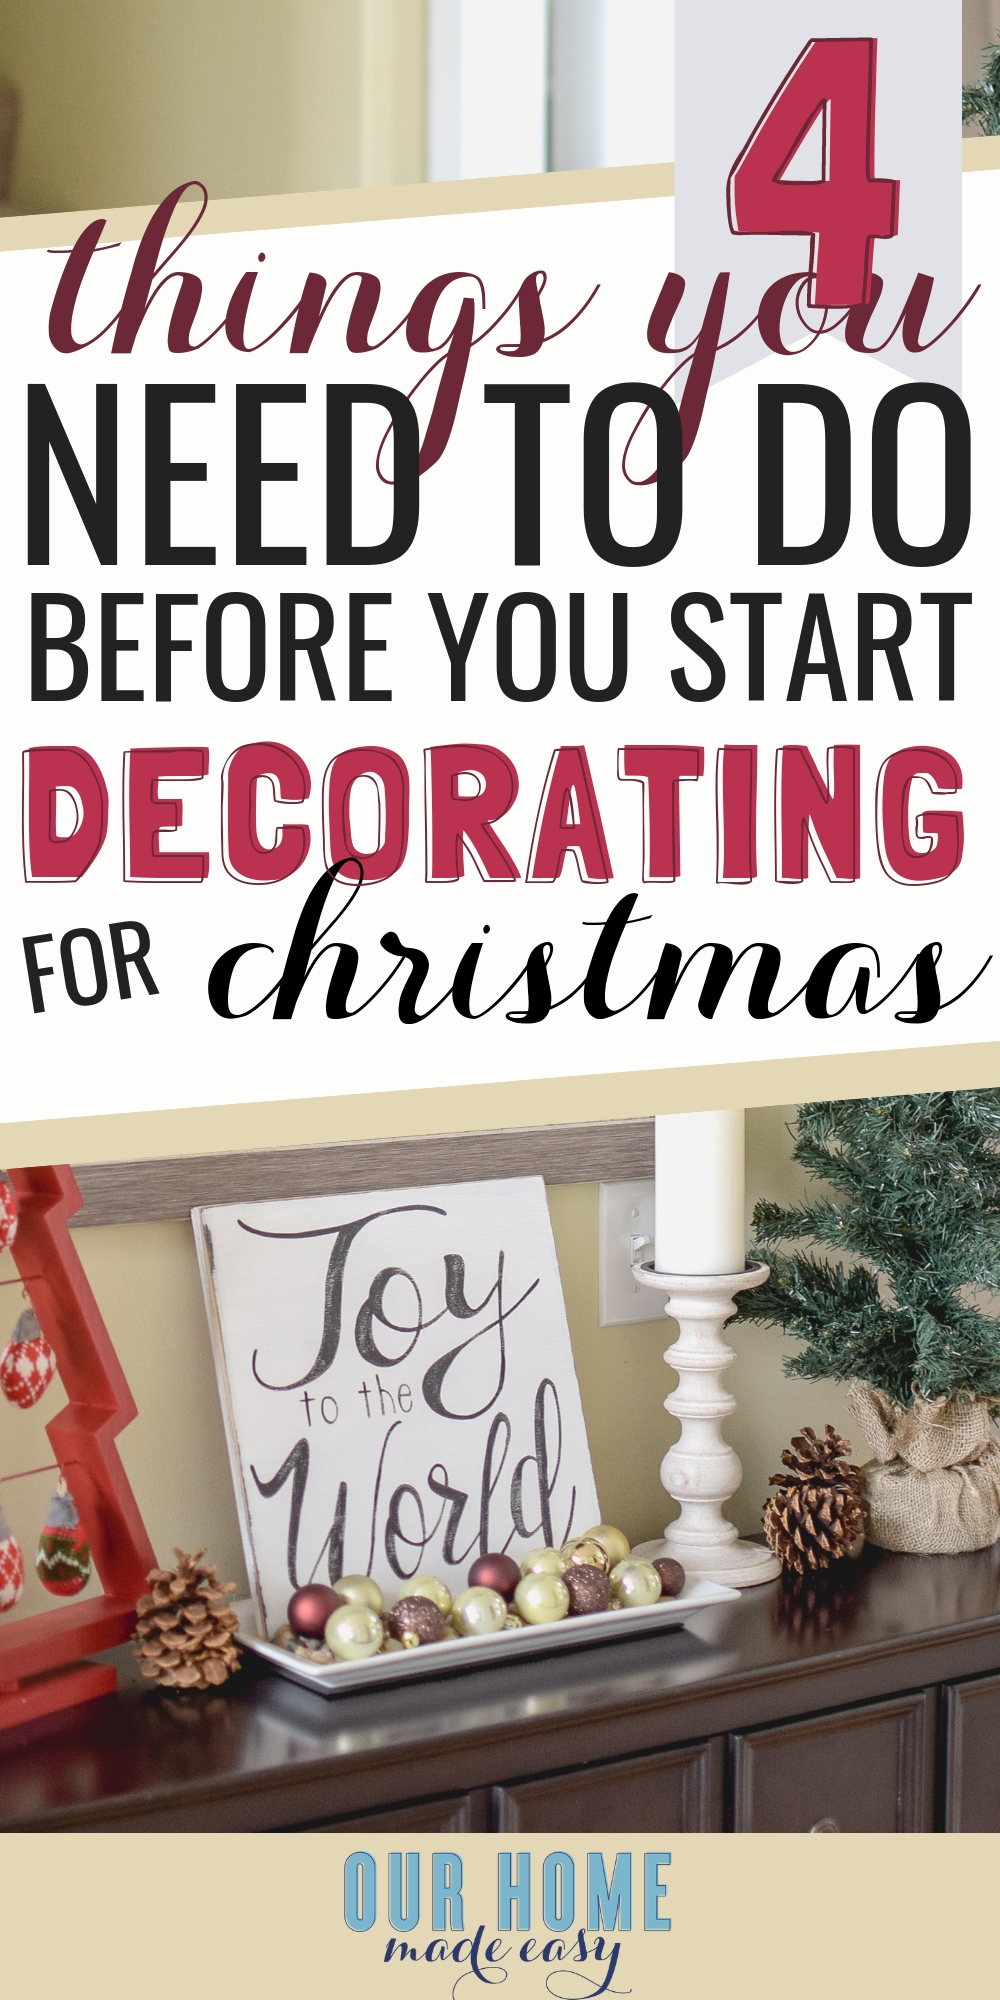 How to prepare your home for Holiday decorating